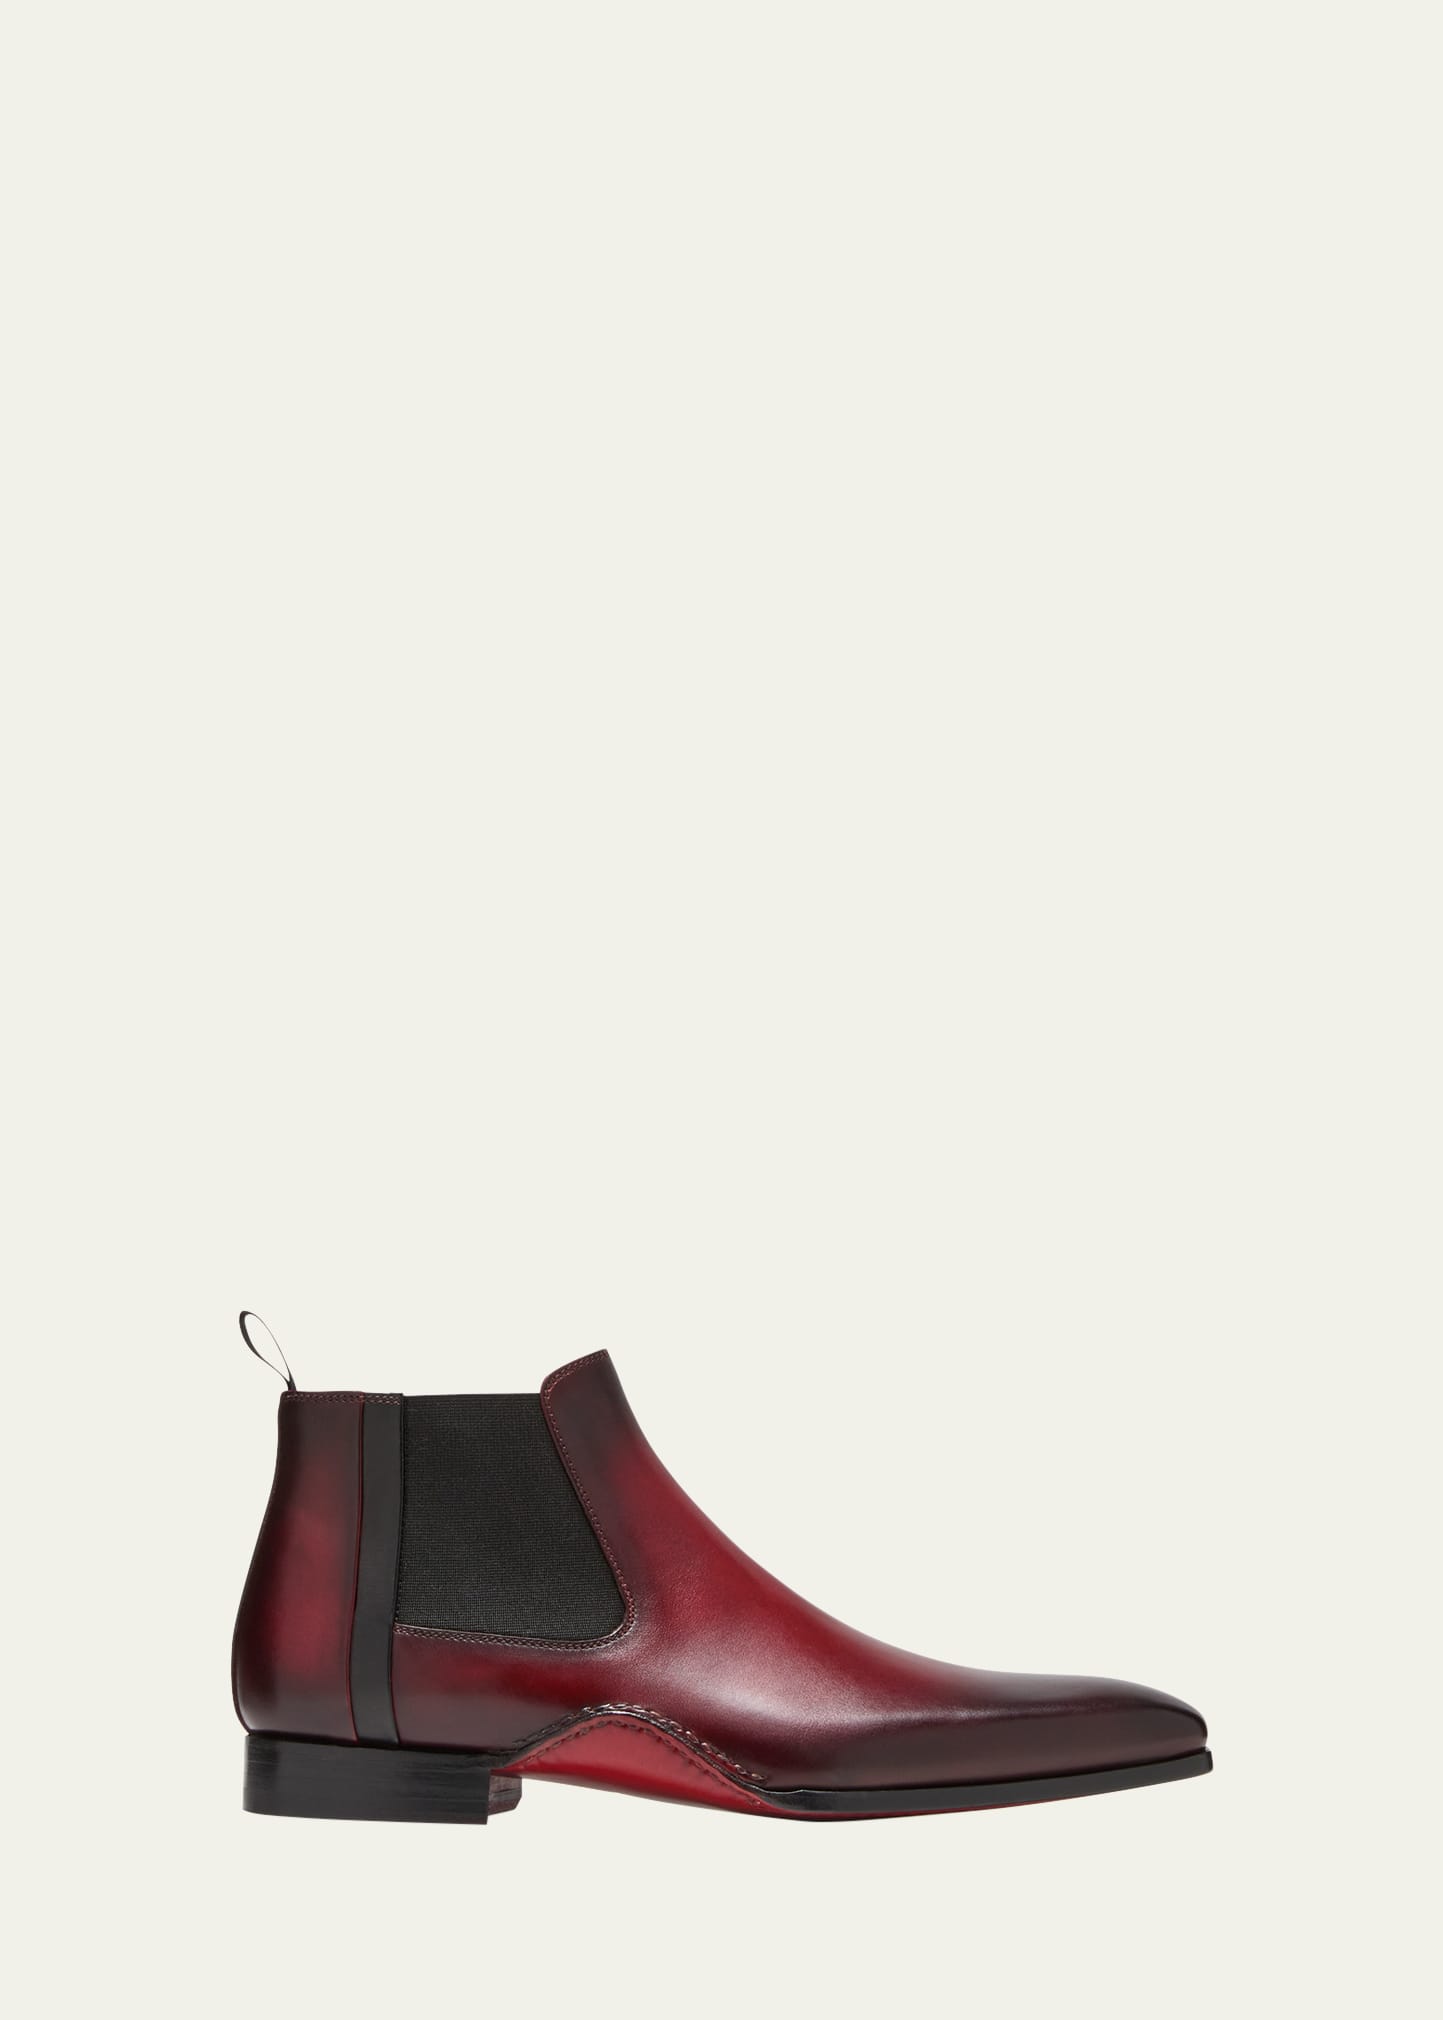 Magnanni Men's Nadir Leather Chelsea Boots In Red/black